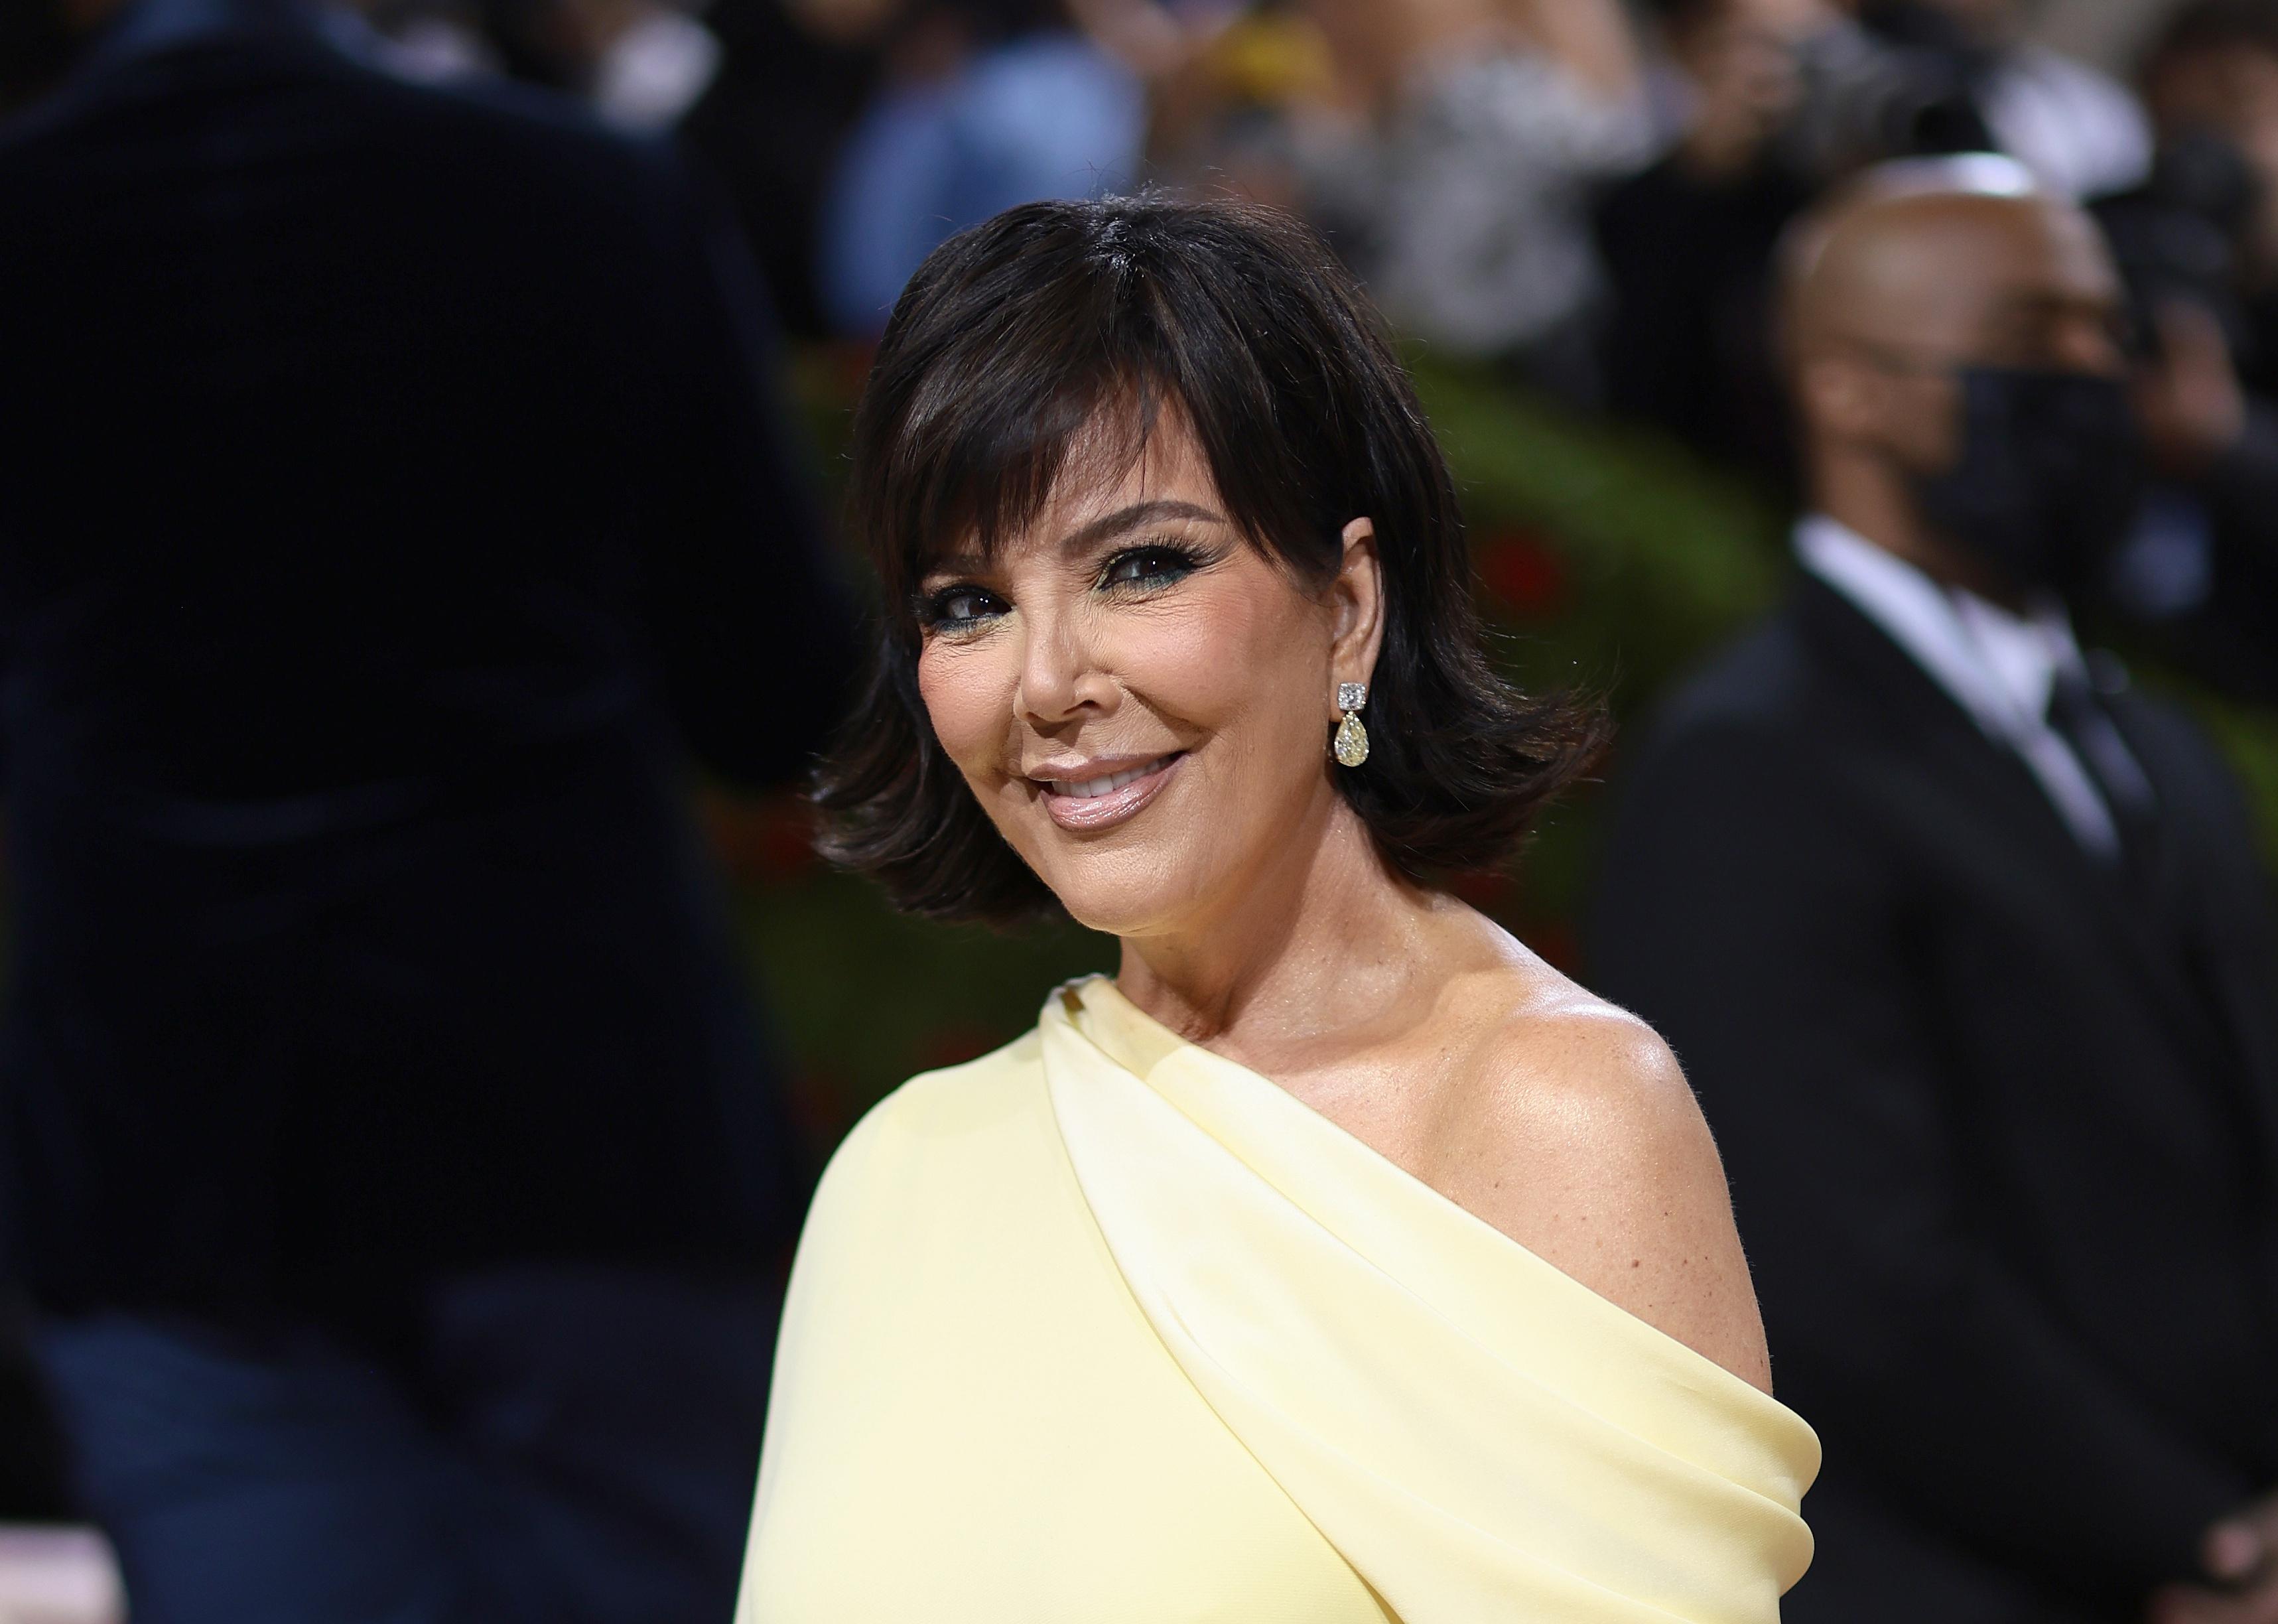 Kris Jenner in a yellow one-shoulder gown.